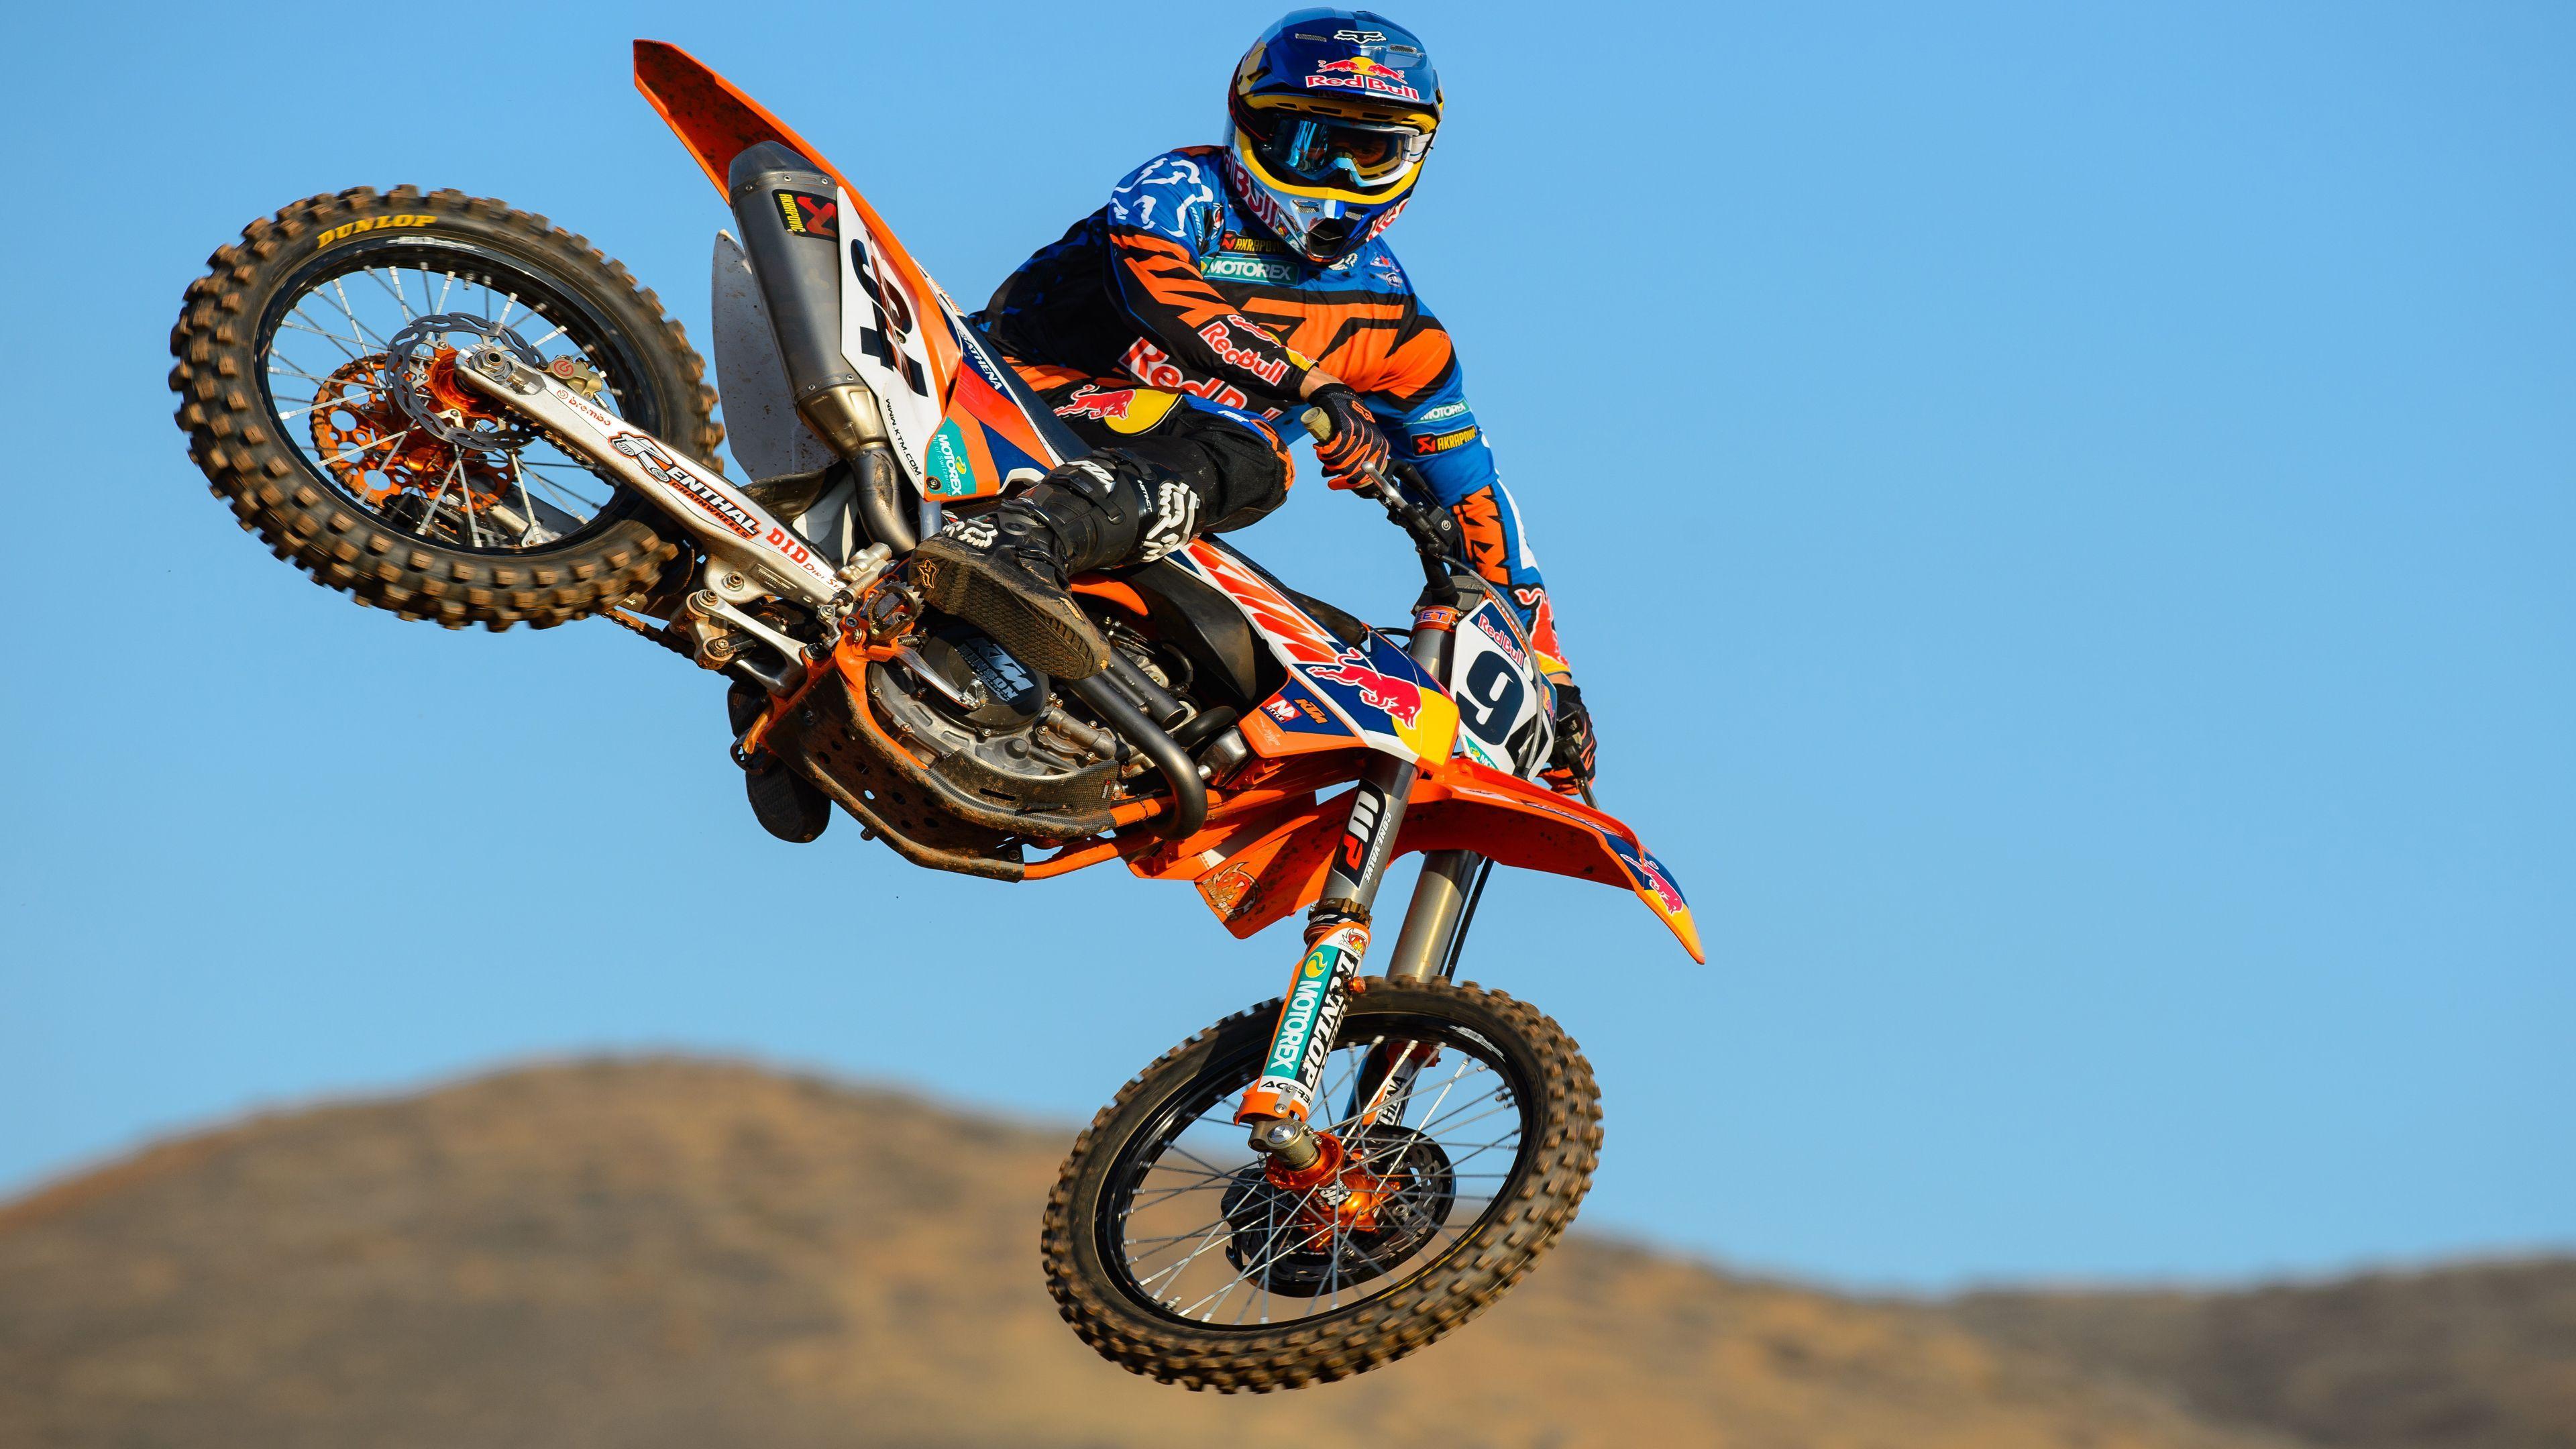 Download Motocross wallpapers for mobile phone free Motocross HD  pictures